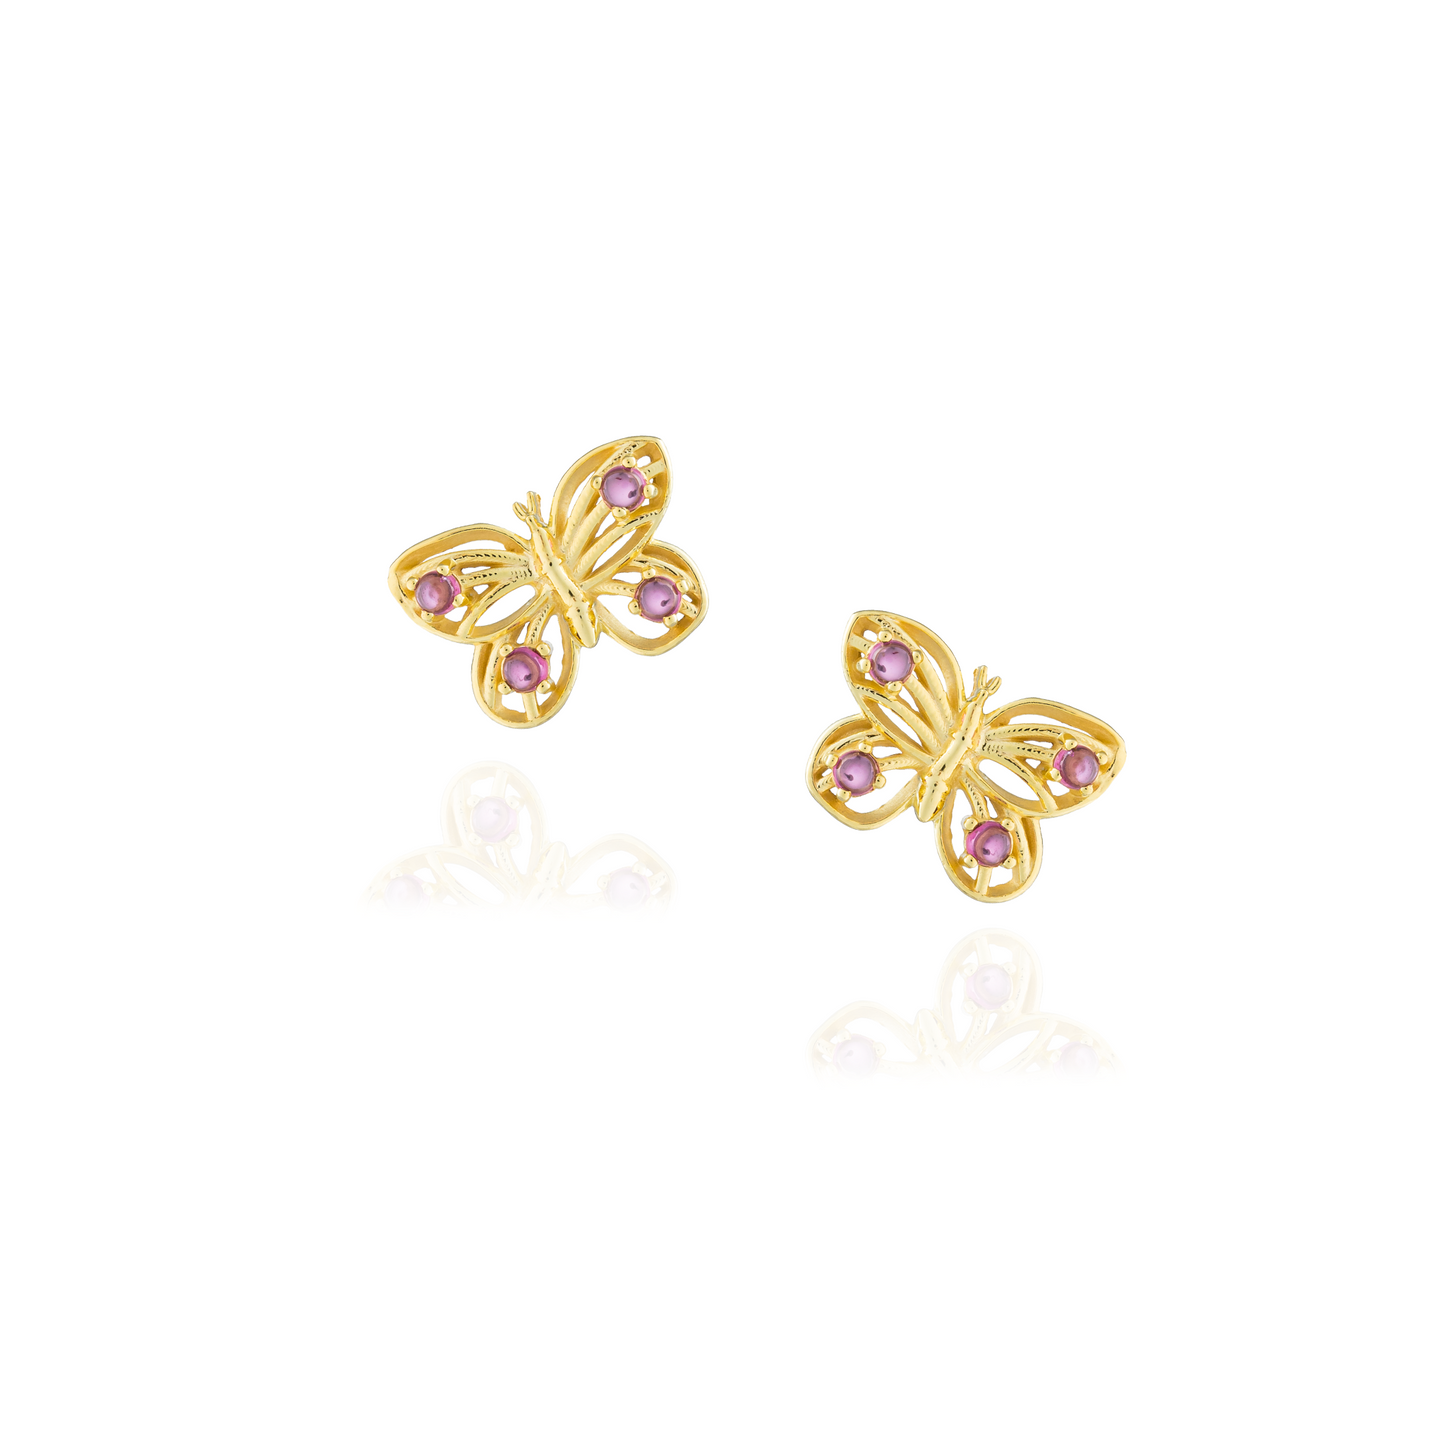 925 Silver Gold Plated 18KT Earrings with Rhodolite